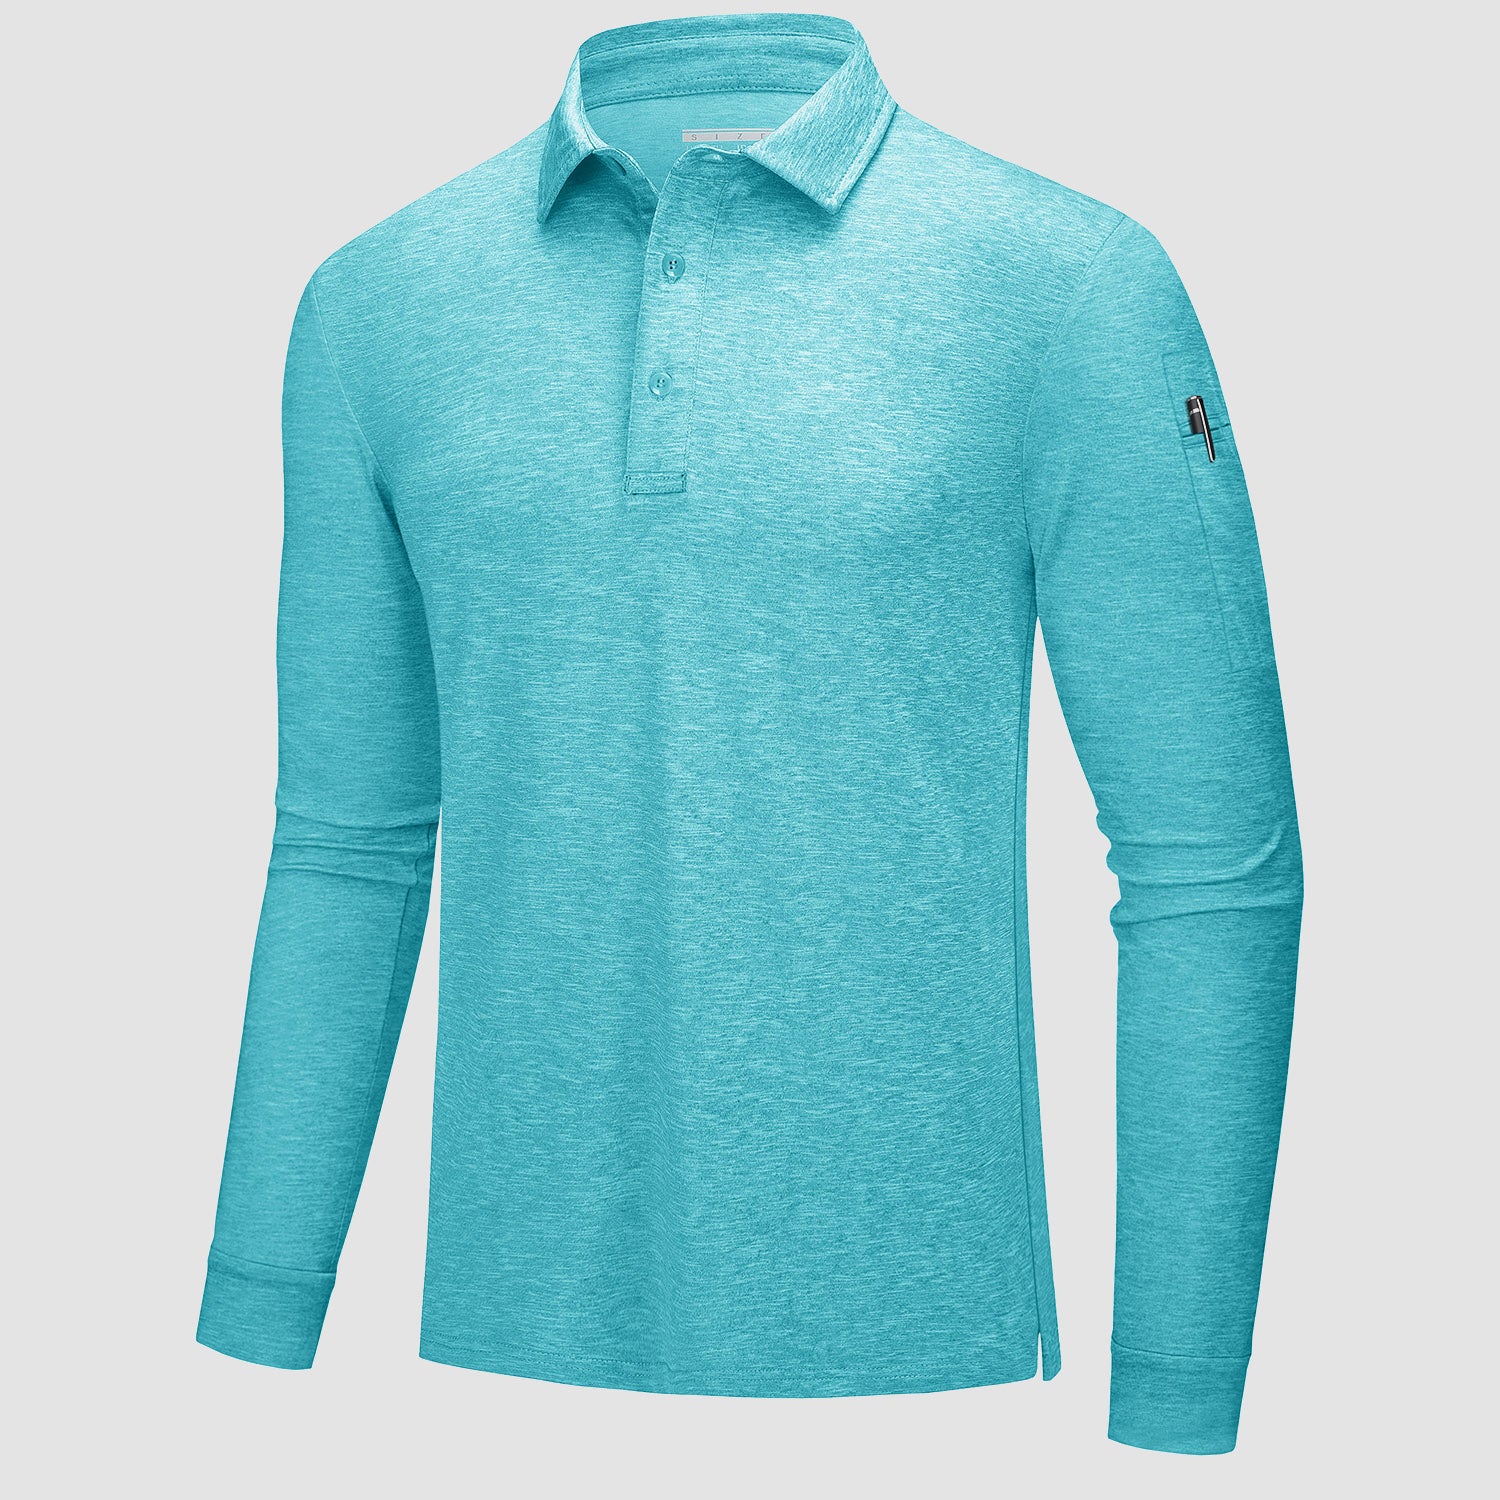 Men's Polo Shirts Long Sleeve 3 Buttons Quick Dry Performance Golf Polo